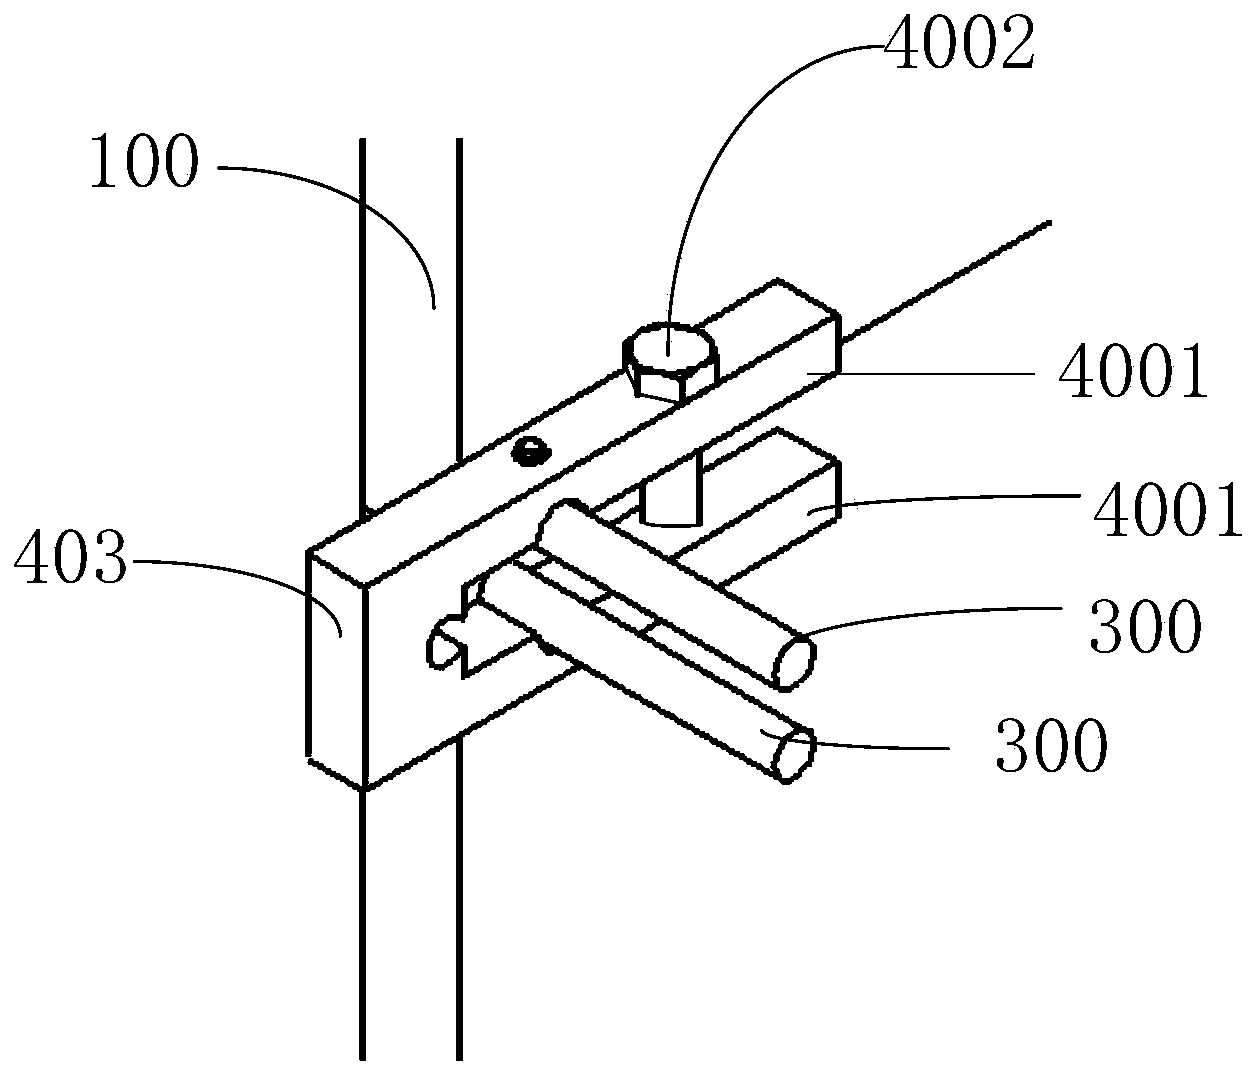 Spliced screen and display device